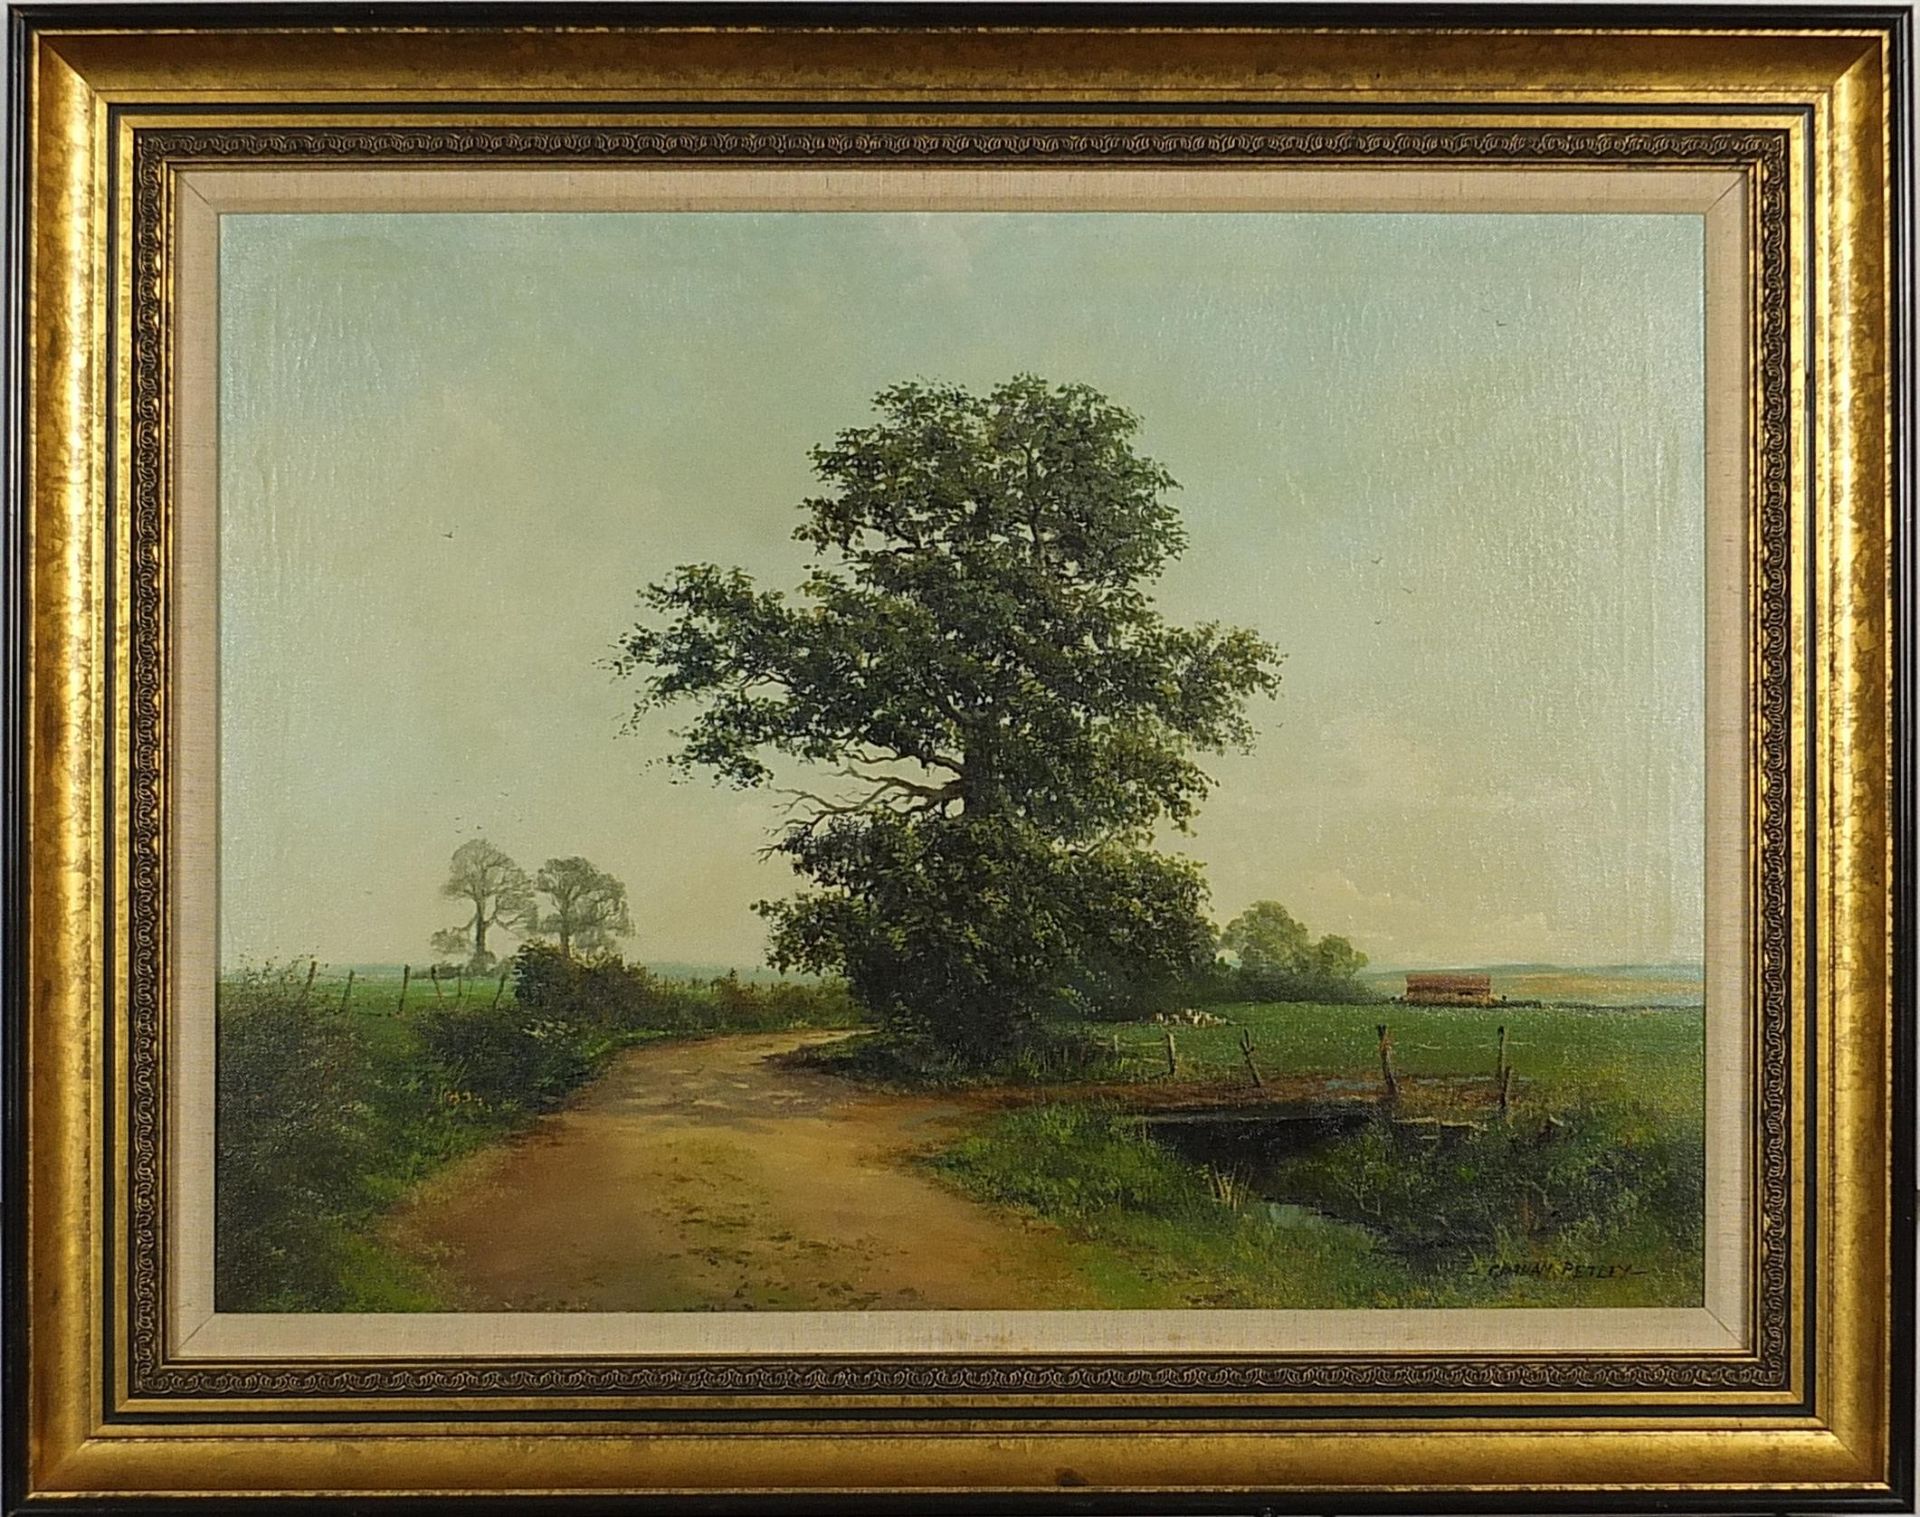 Graham Petley - Pan Lane, Hanningfield, oil on canvas, inscribed E Stacy Marks label verso, - Image 2 of 5